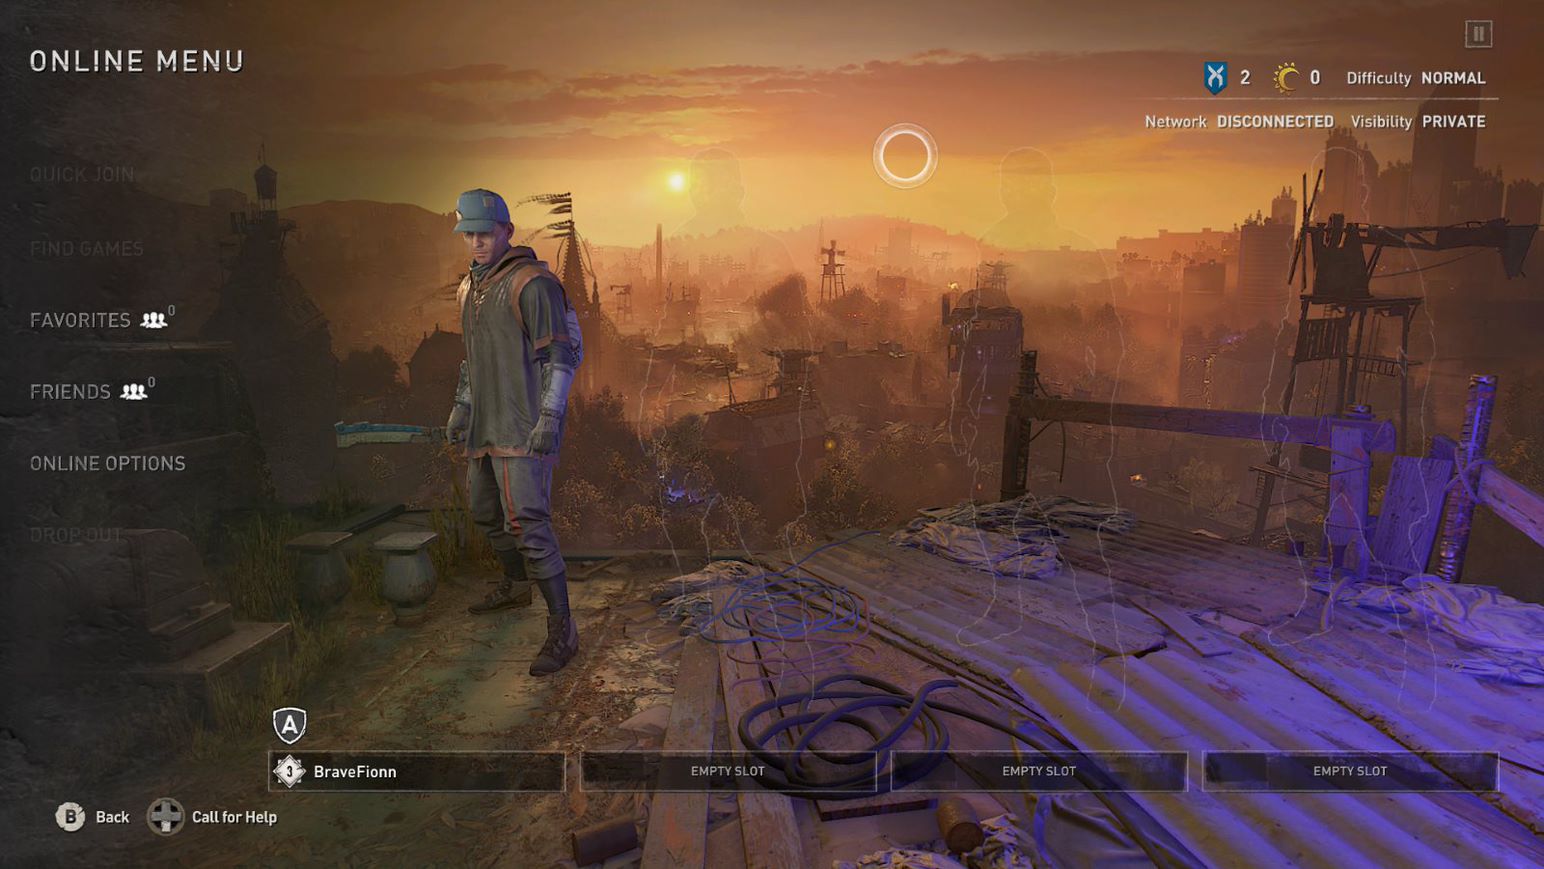 Dying Light 2 Co-op Guide: How to Play Multiplayer with Friends in Dying Light 2 | VG247